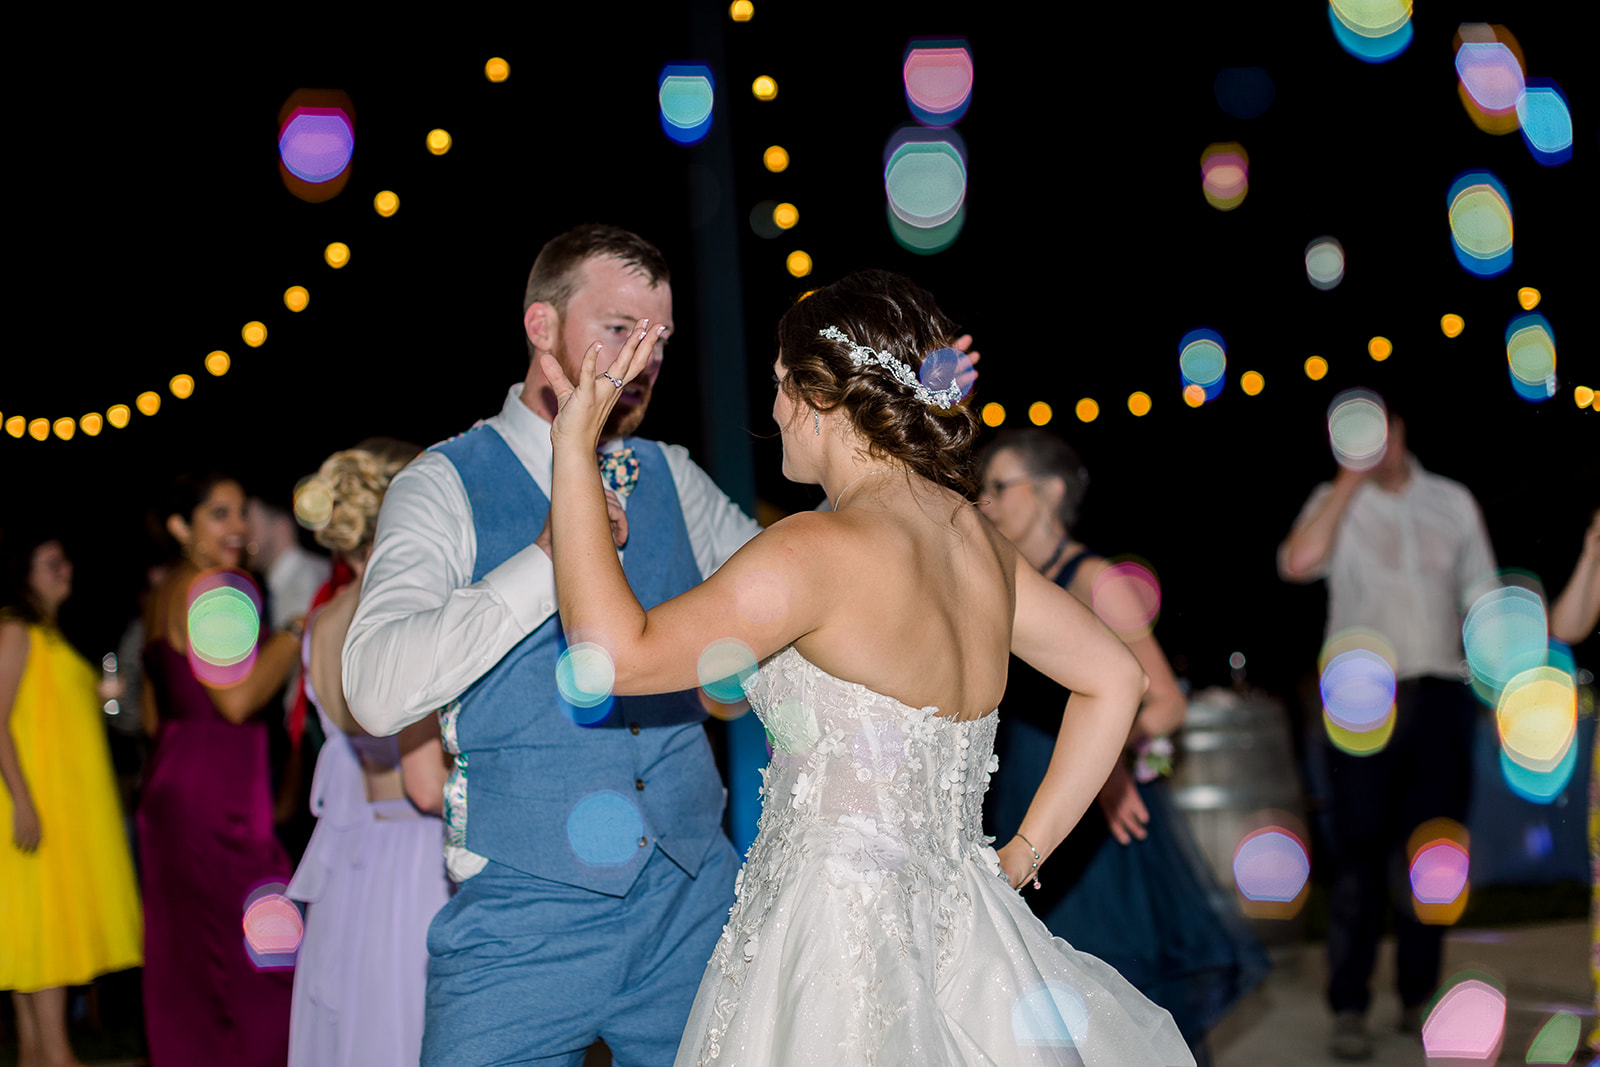 Groom spins the bride with genuine happiness, capturing the essence of their celebration